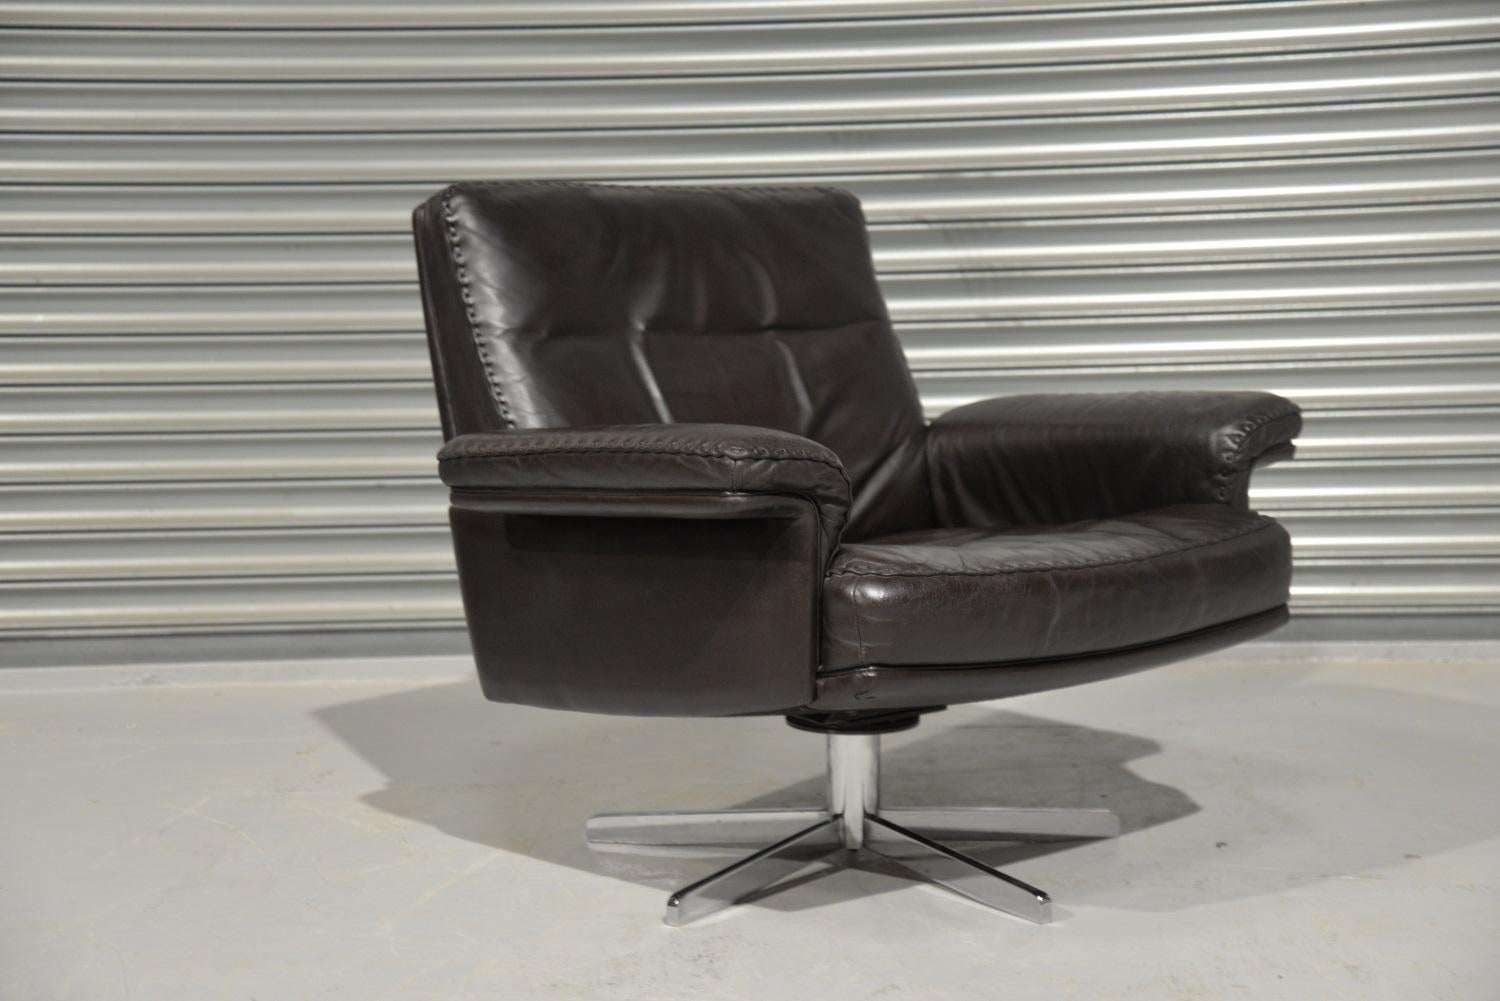 Discounted airfreight for our US and International customers (from 2 weeks door to door)

We are delighted to bring to you an ultra-rare and highly desirable De Sede DS 35 swivel armchair. Hand built in the 1970s by De Sede craftsman in Switzerland,